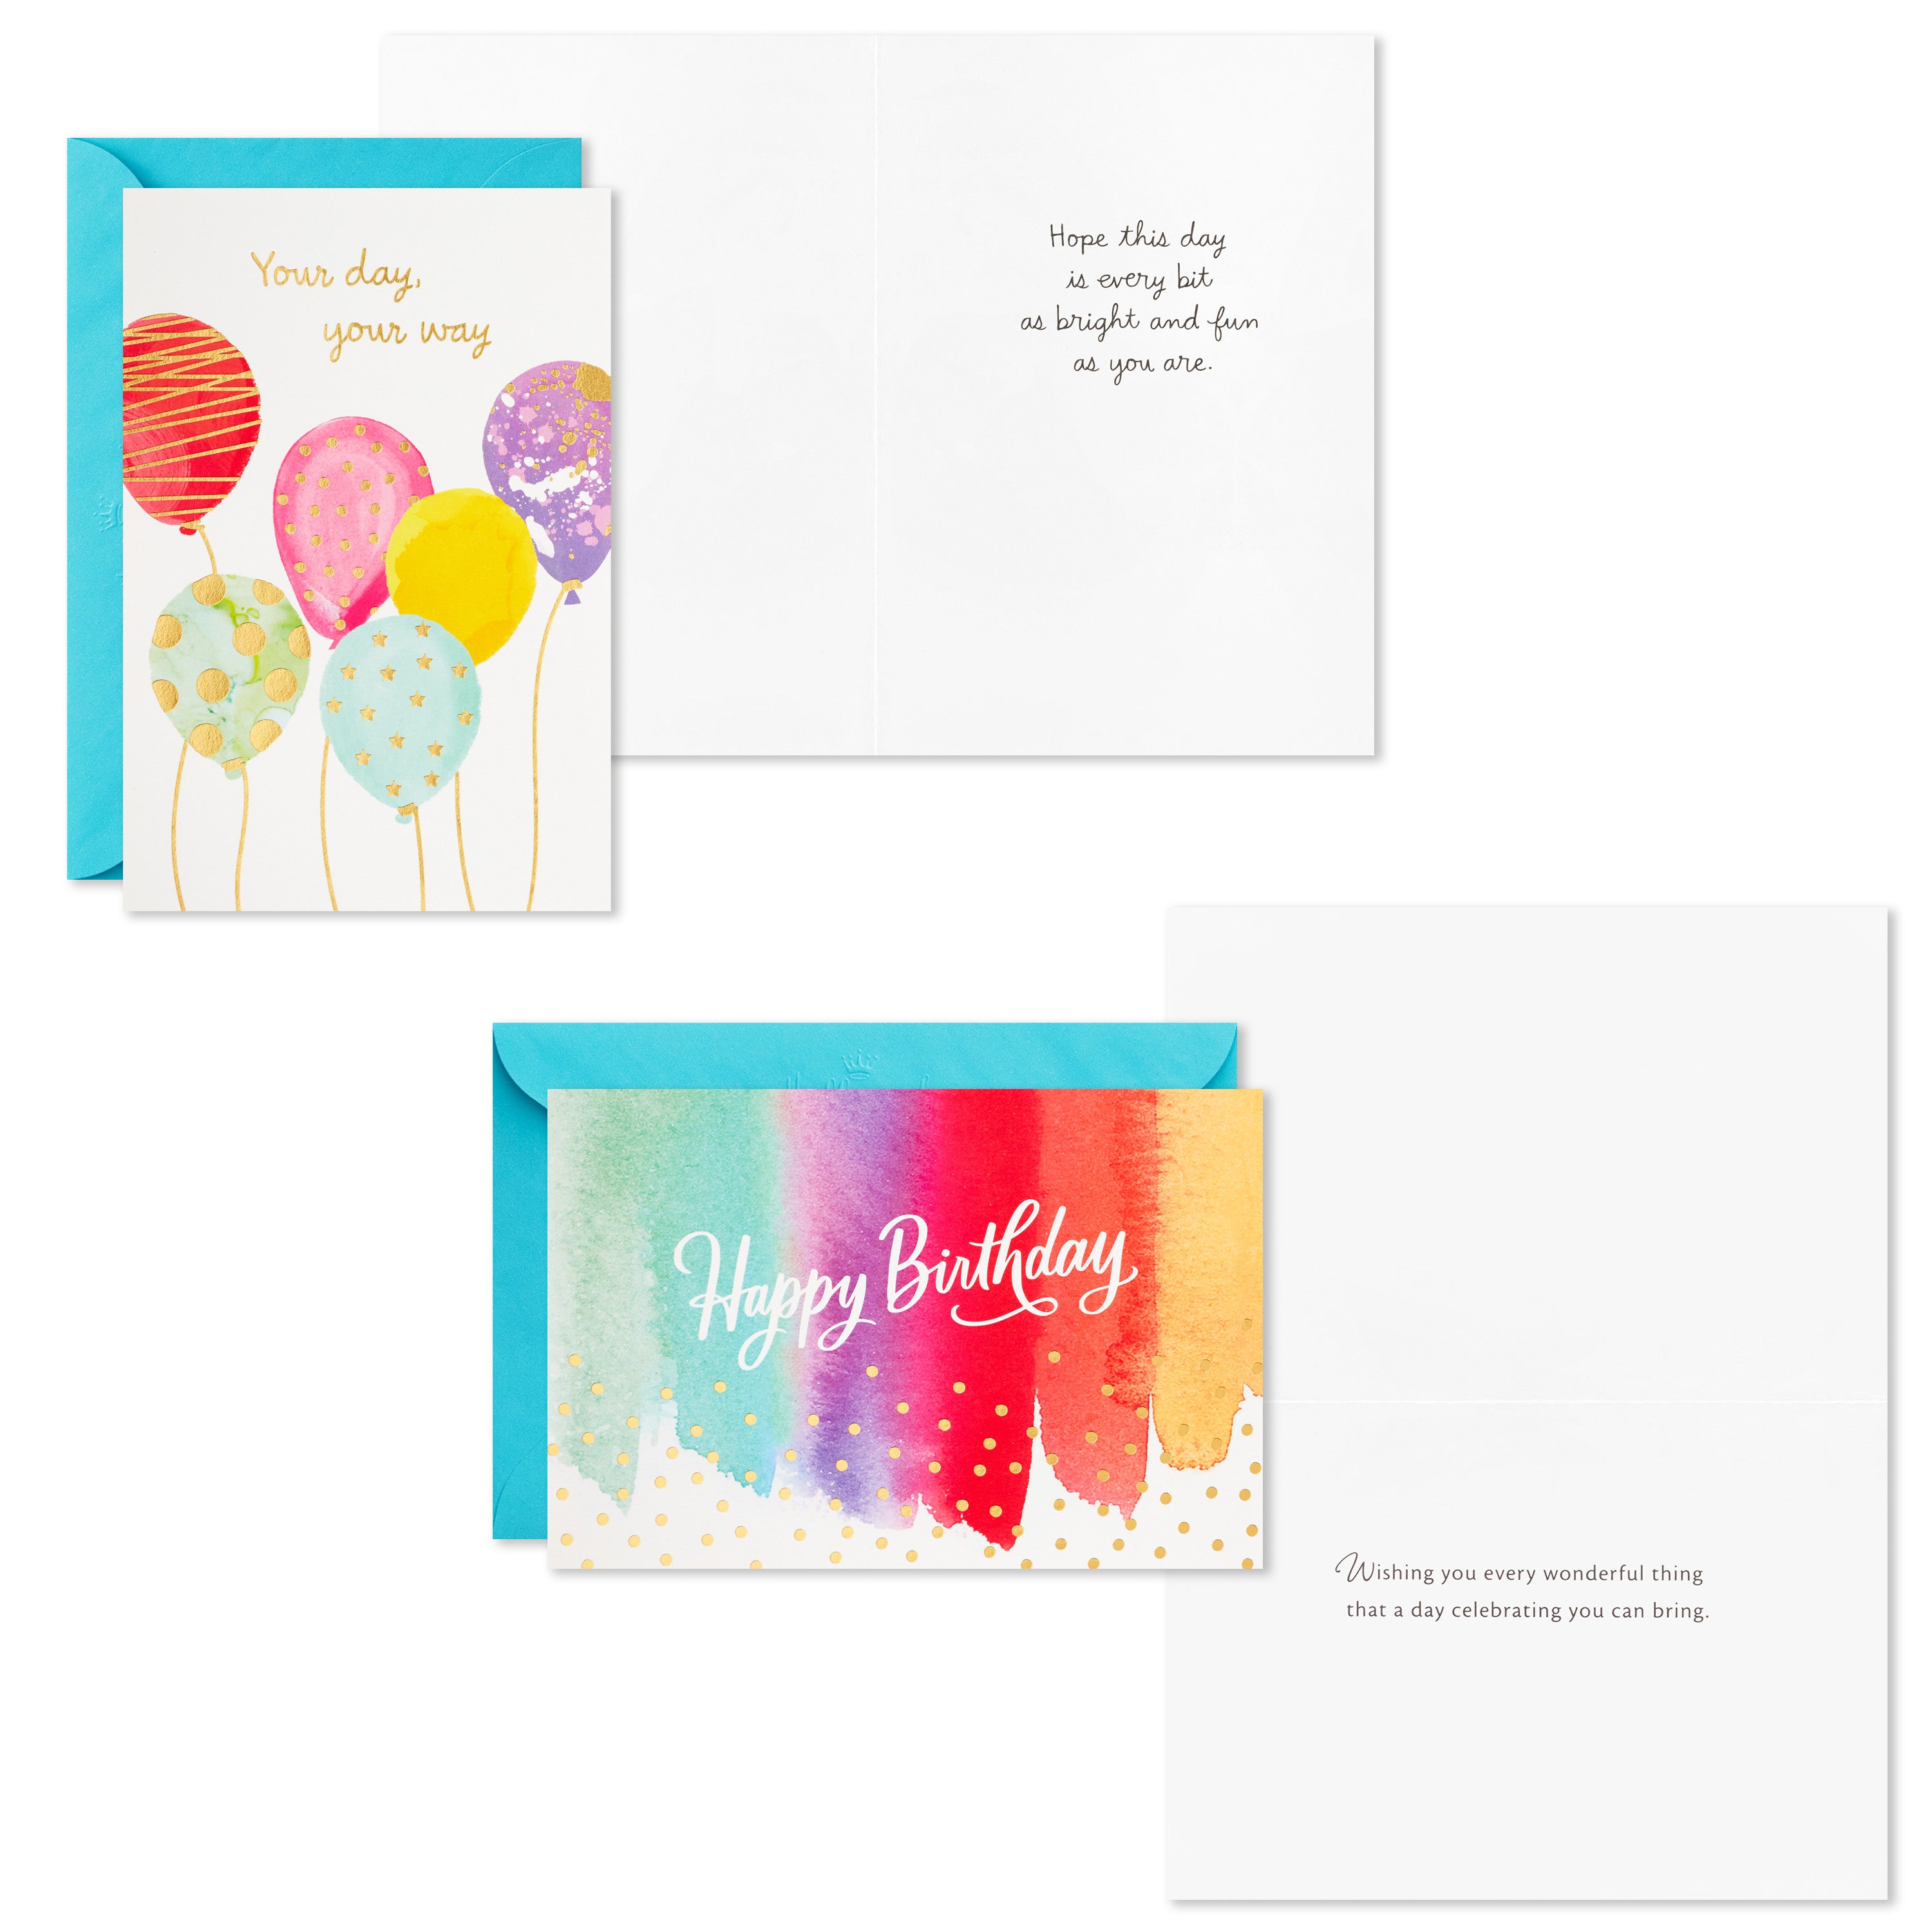 Birthday Cards Assortment, 36 Cards with Envelopes (Celebrate)